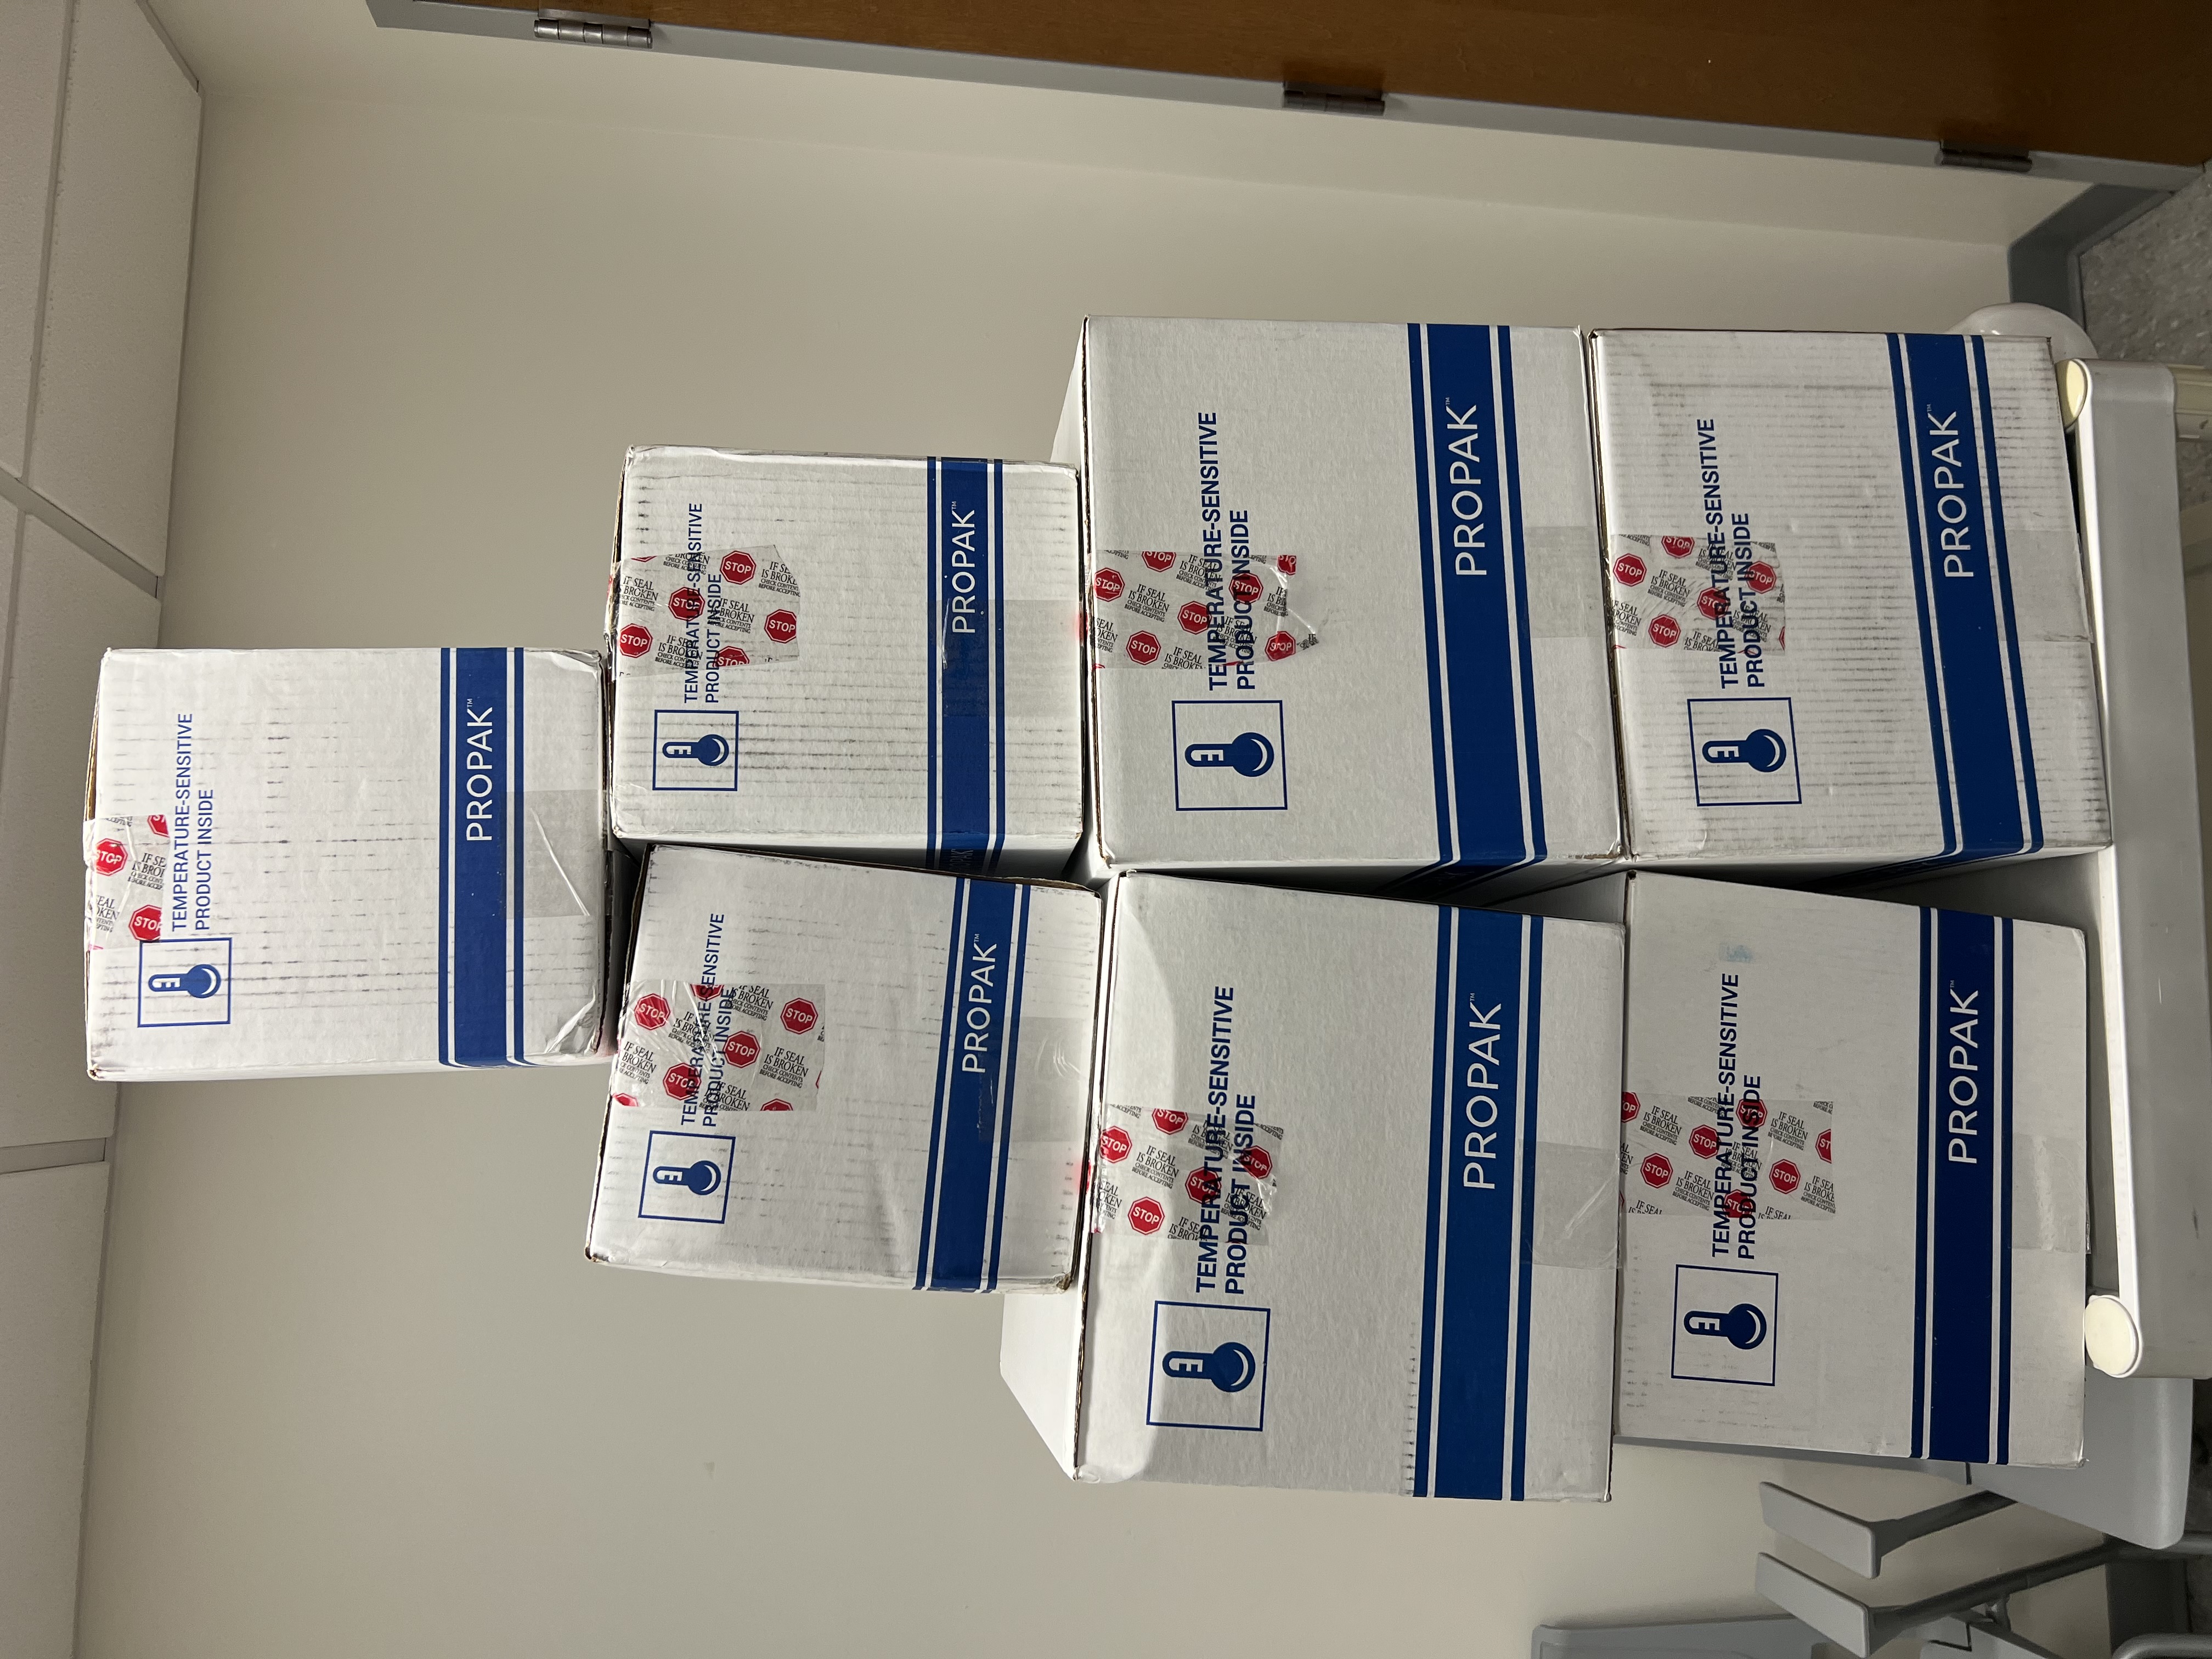 A stack of 7 white and blue boxes that are temperature sensitive